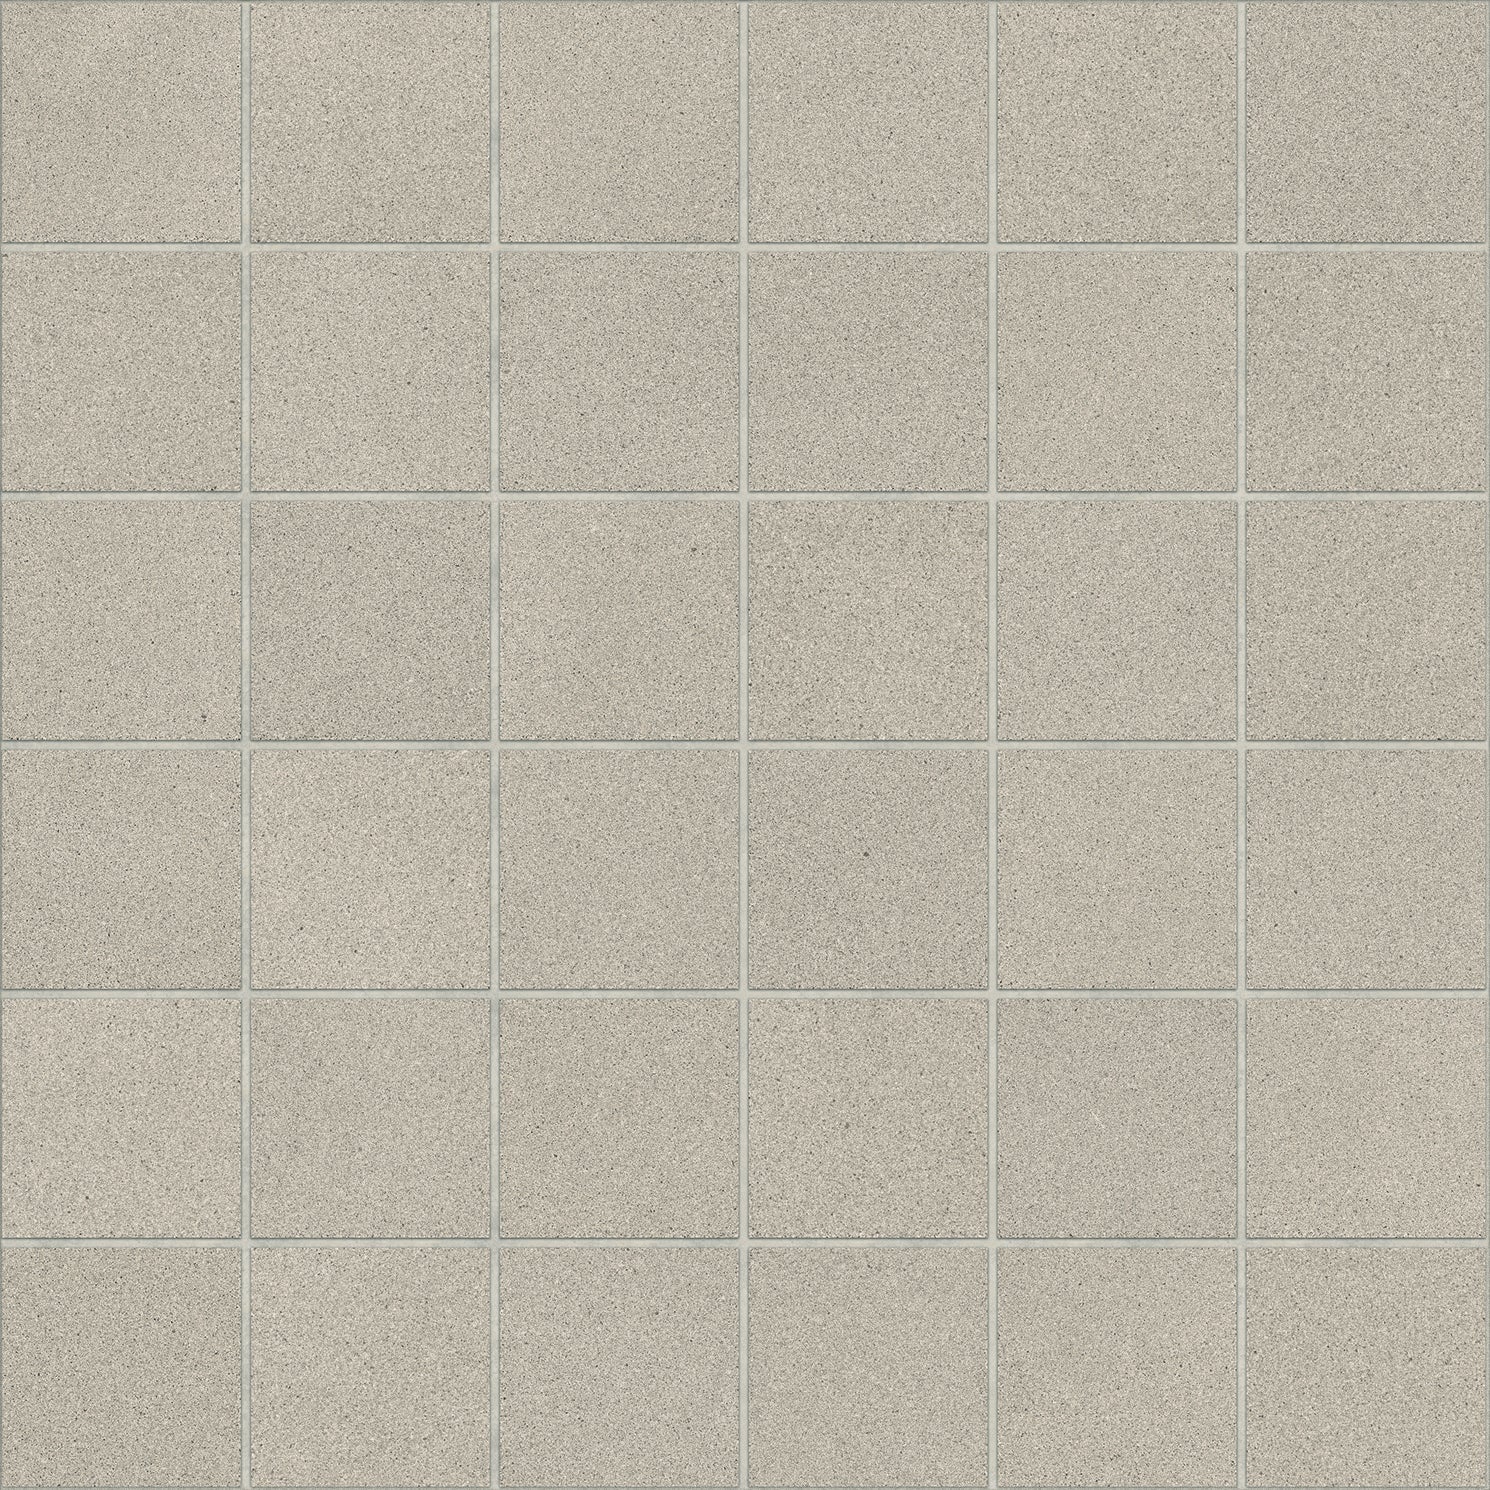 landmark 9mm masterplan artistic beige straight stack 2x2 mosaic 12x12x9mm matte rectified porcelain tile distributed by surface group international